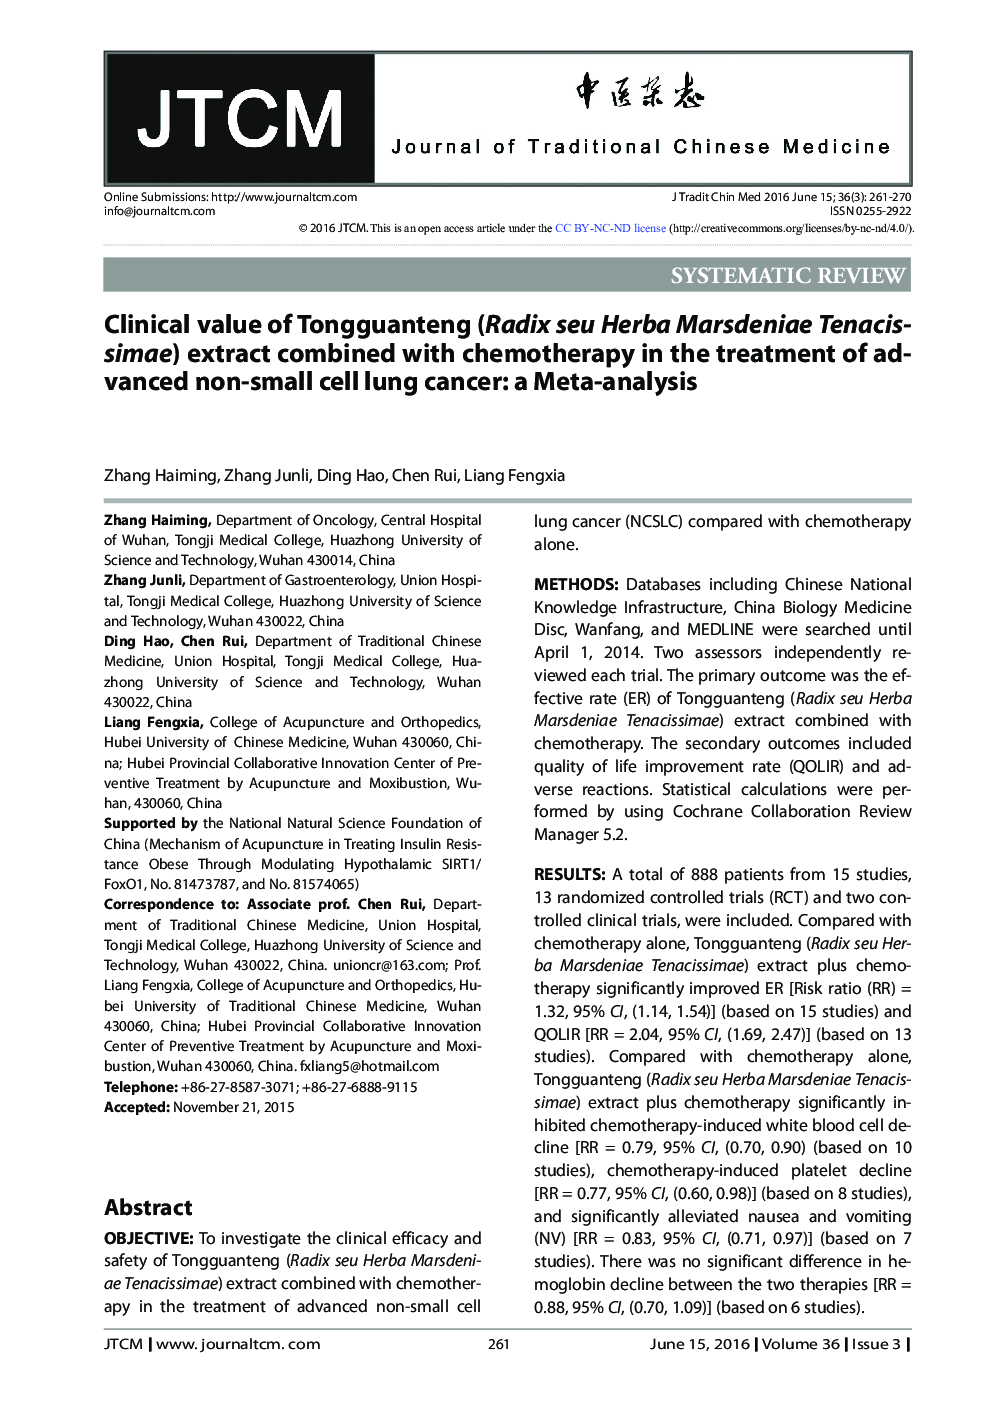 Clinical value of Tongguanteng (Radix seu Herba Marsdeniae Tenacissimae) extract combined with chemotherapy in the treatment of advanced non-small cell lung cancer: a Meta-analysis 